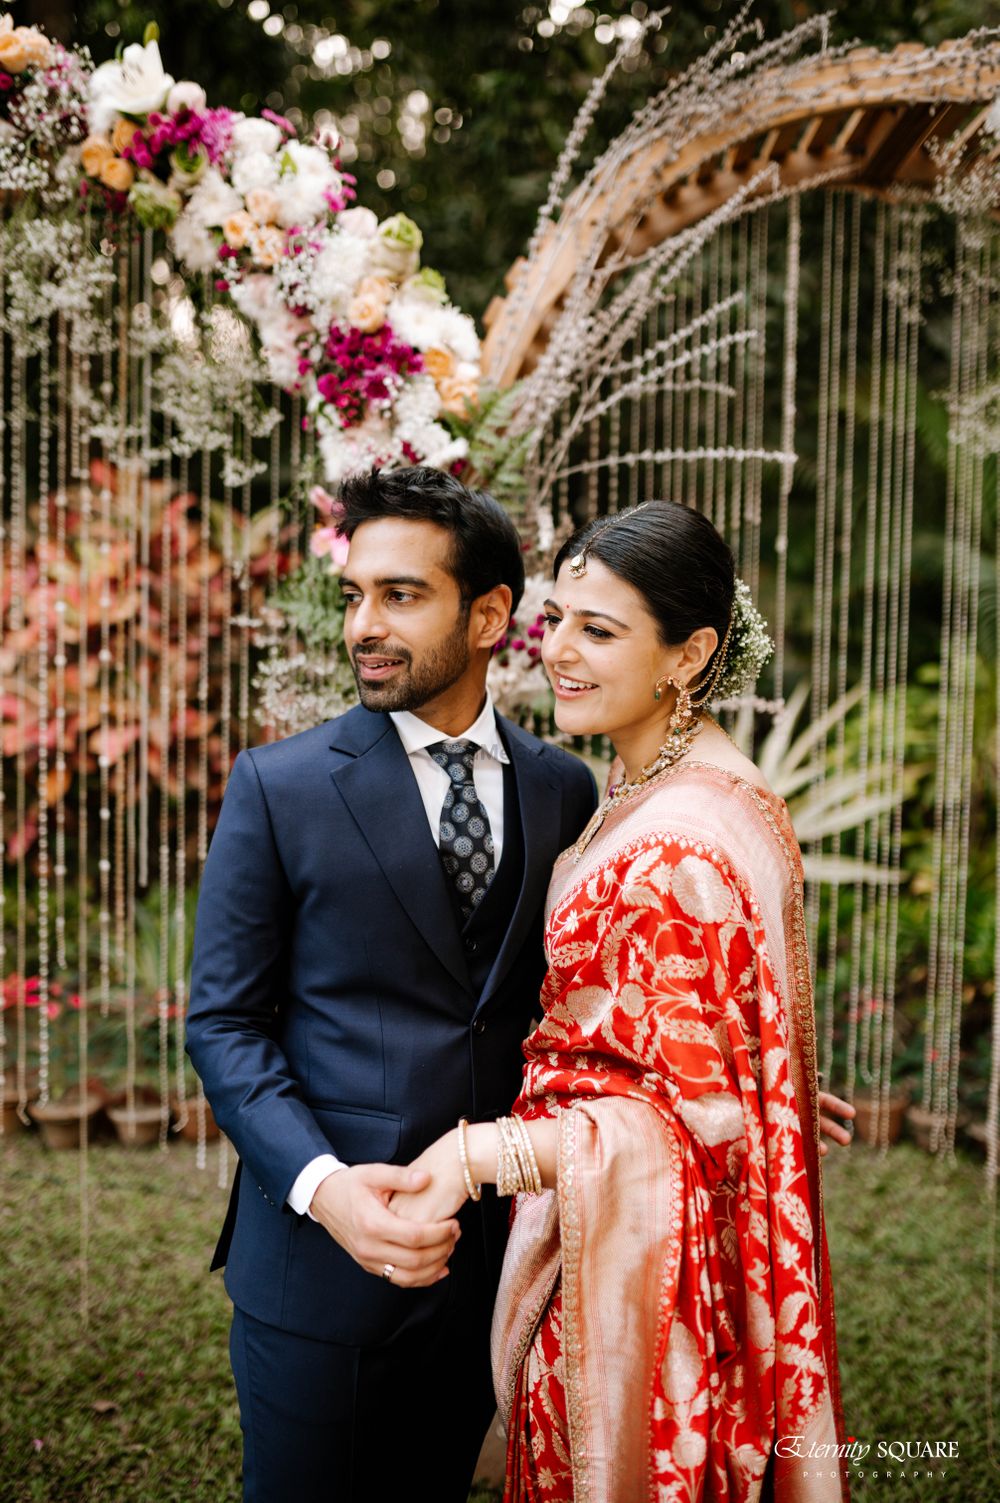 Photo of Small intimate wedding with bride in red sabyasachi saree